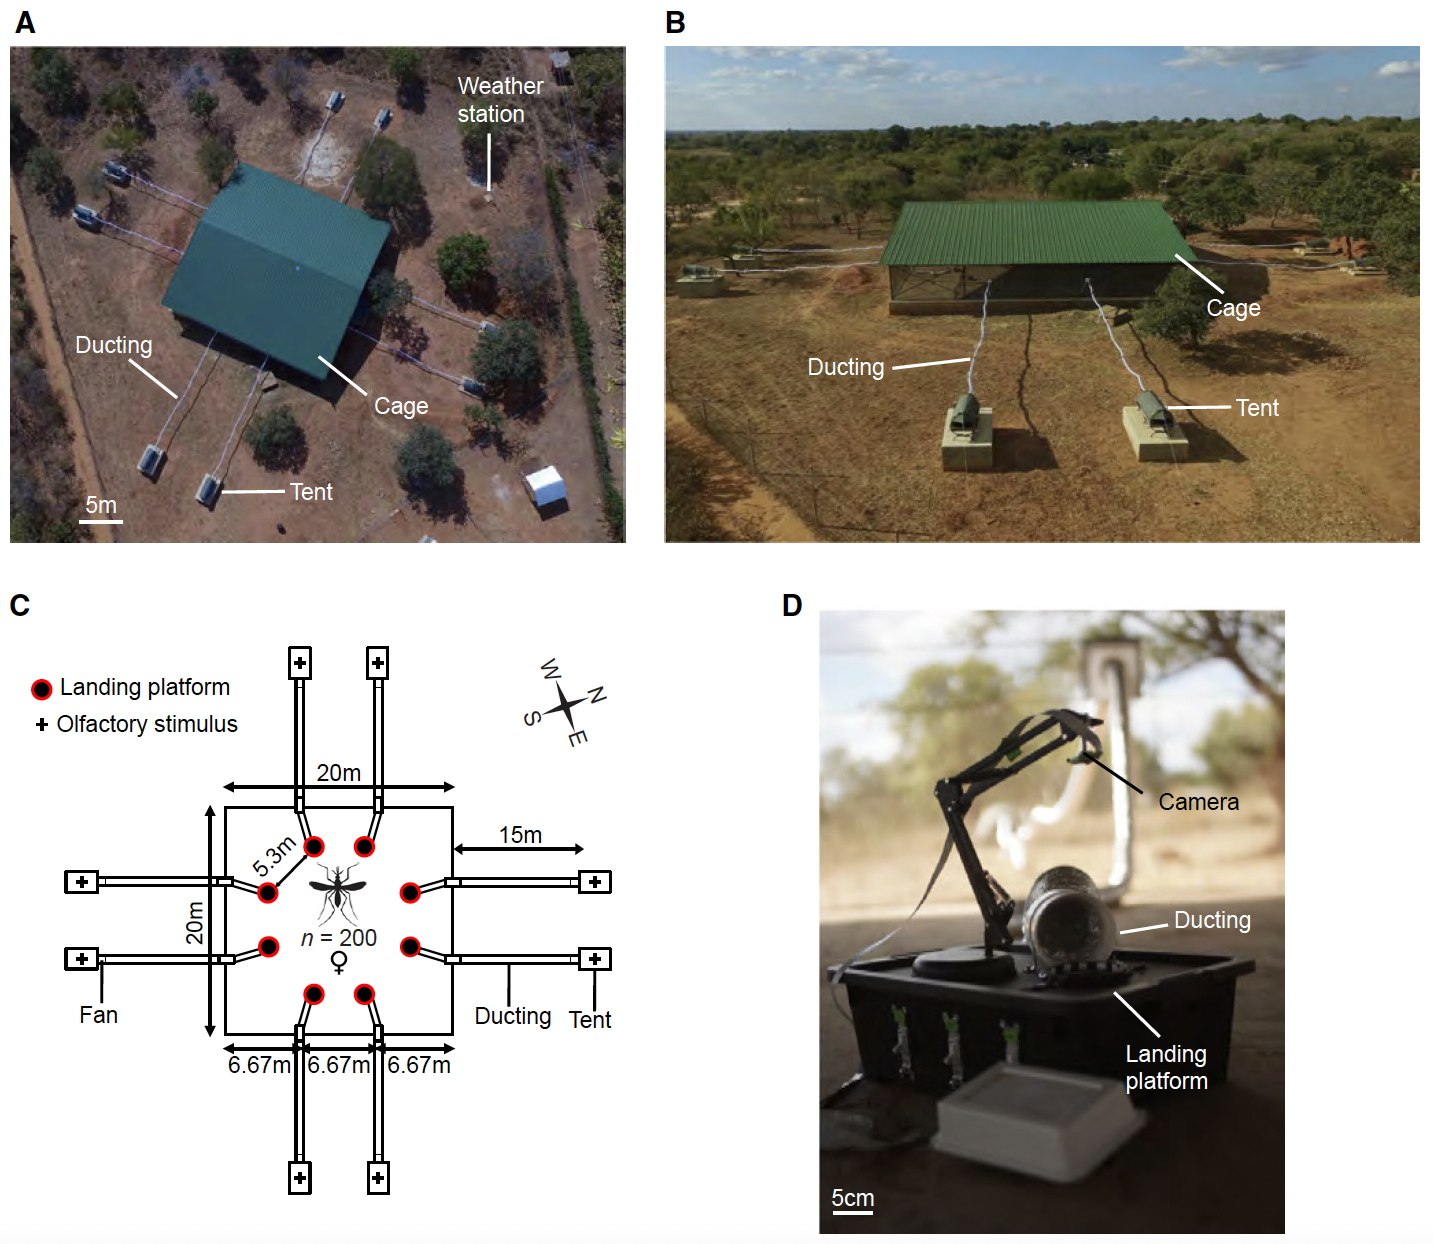 Giraldo, D.; Rankin-Turner, S.; Corver, A.; et al. Human scent guides mosquito thermotaxis and host selection under naturalistic conditions. Curr. Biol. 2023, 33 (12), 2367-2382. DOI: 10.1016/j.cub.2023.04.050